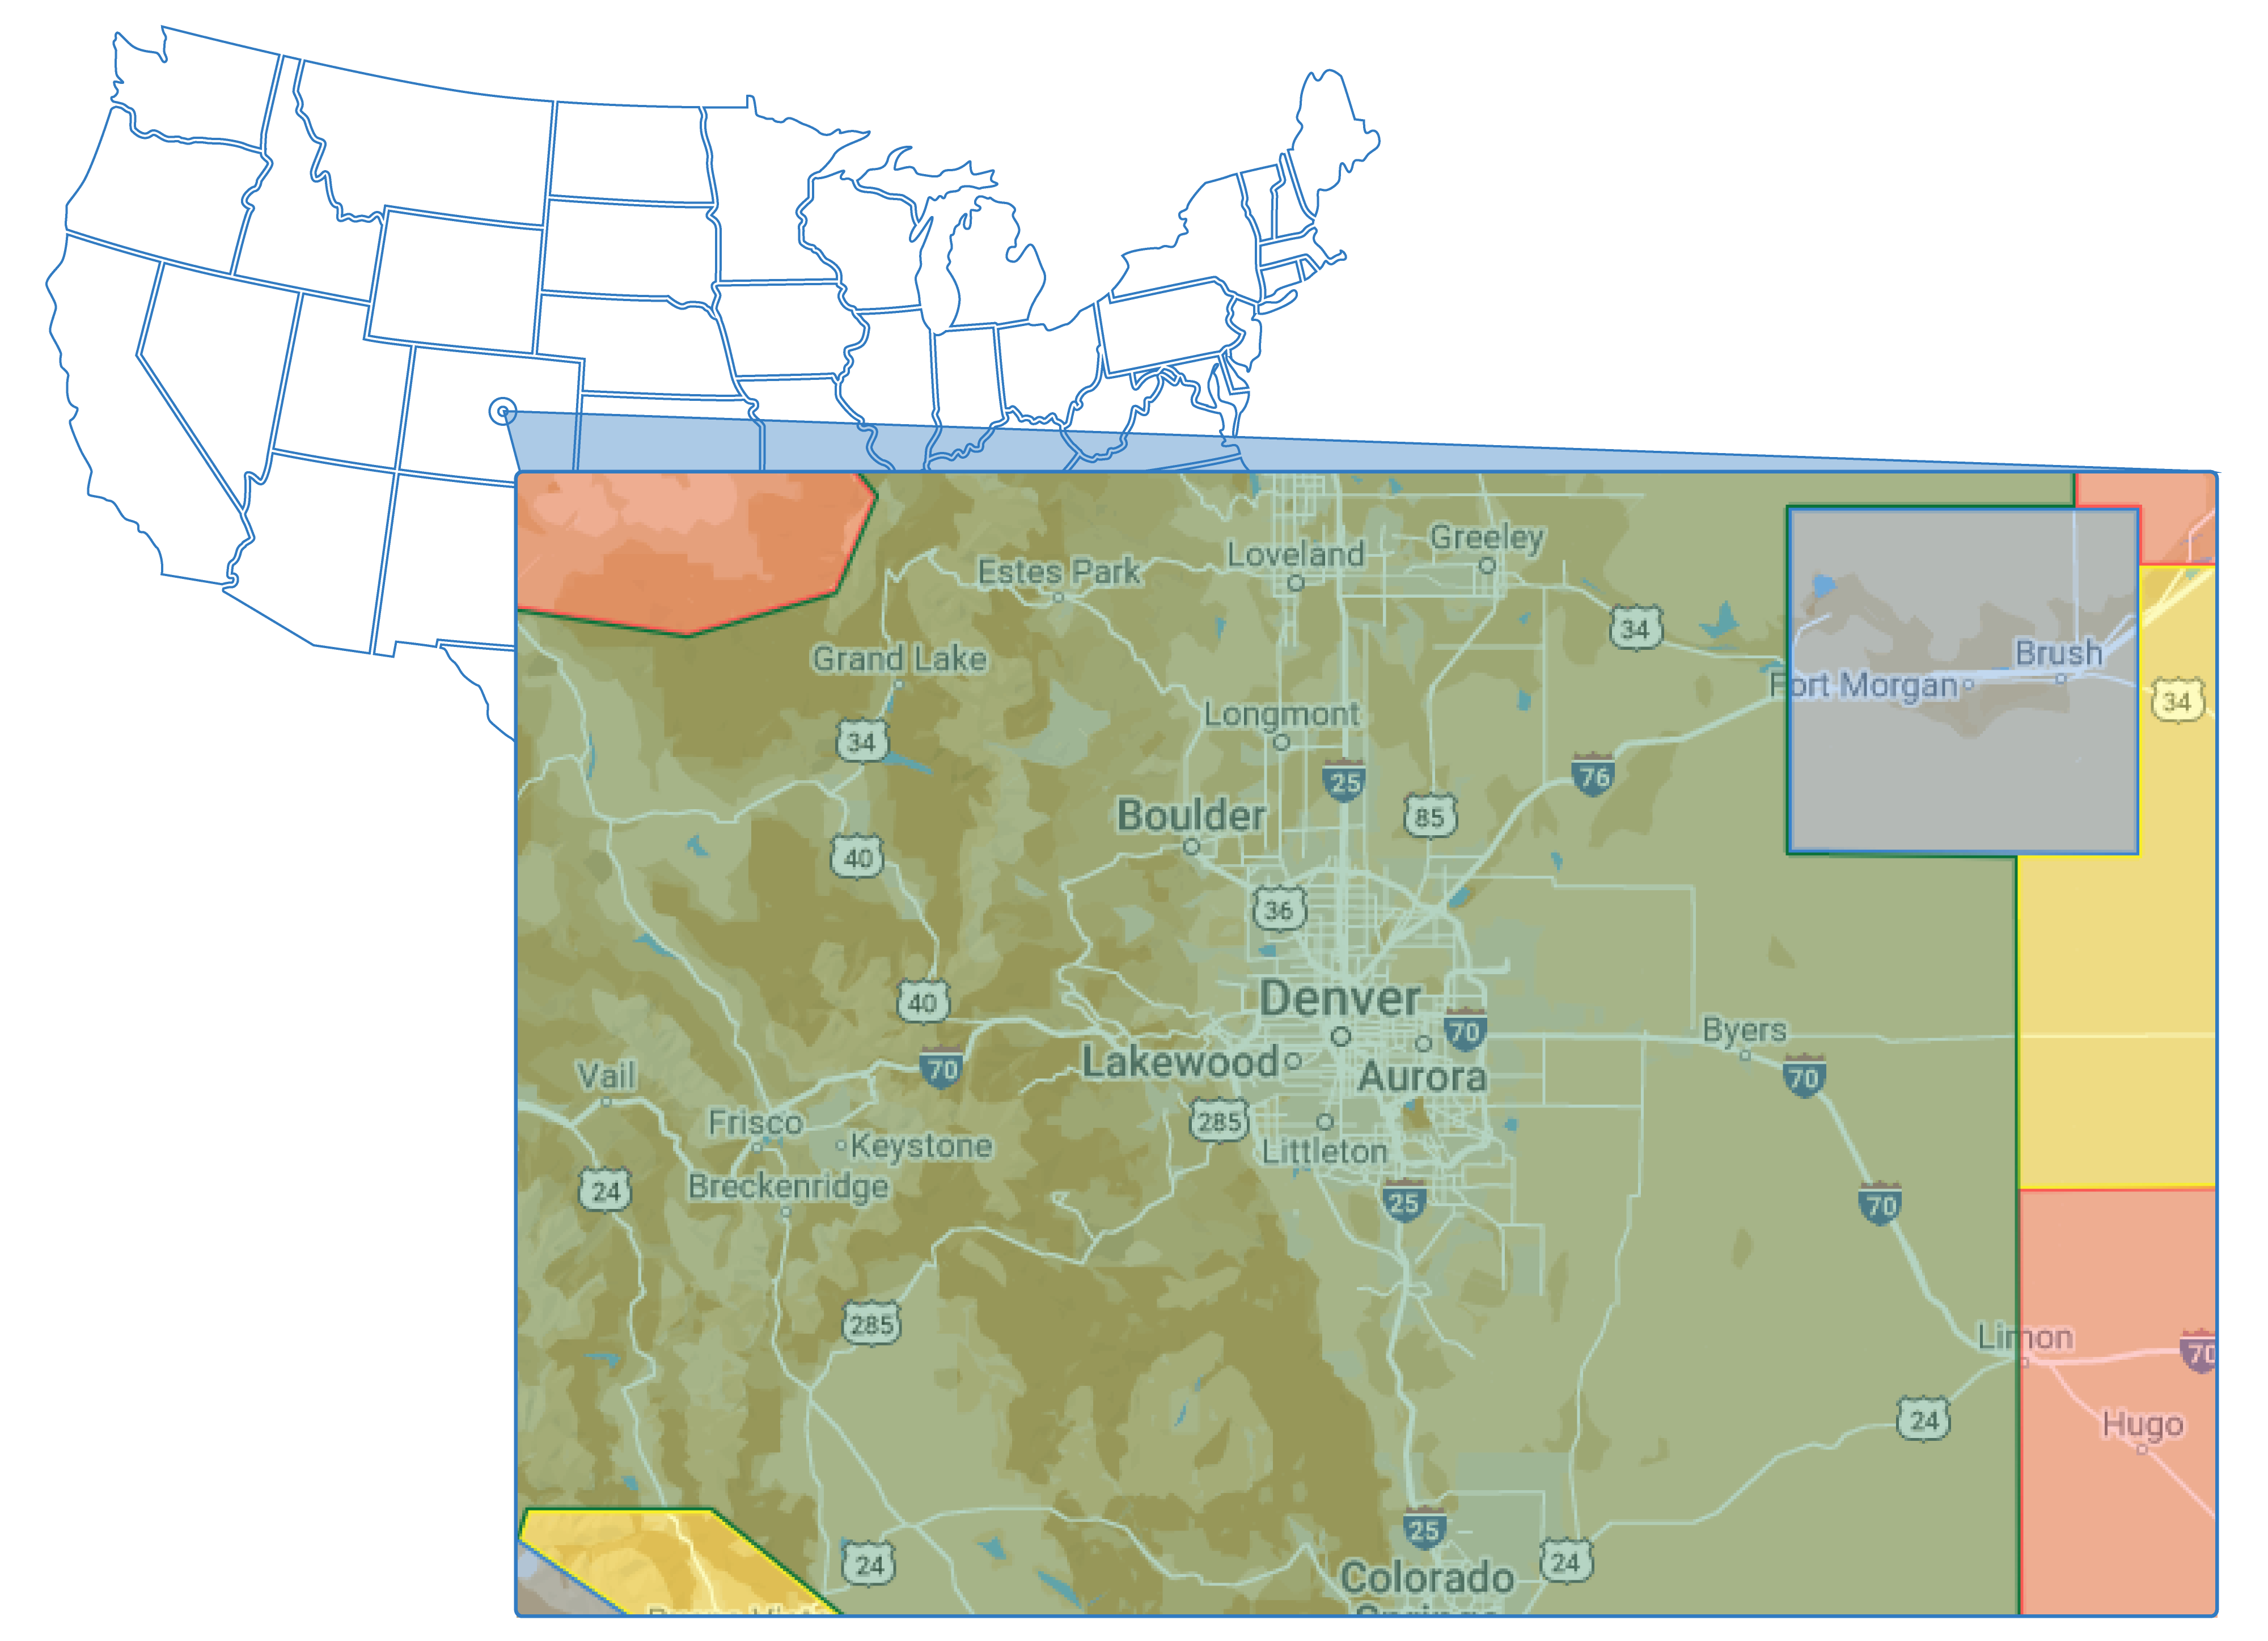 This map shows the income distribution in the Denver metro area. The green area is home to the highest earners, while the blue, yellow and orange denote lower-earning areas.